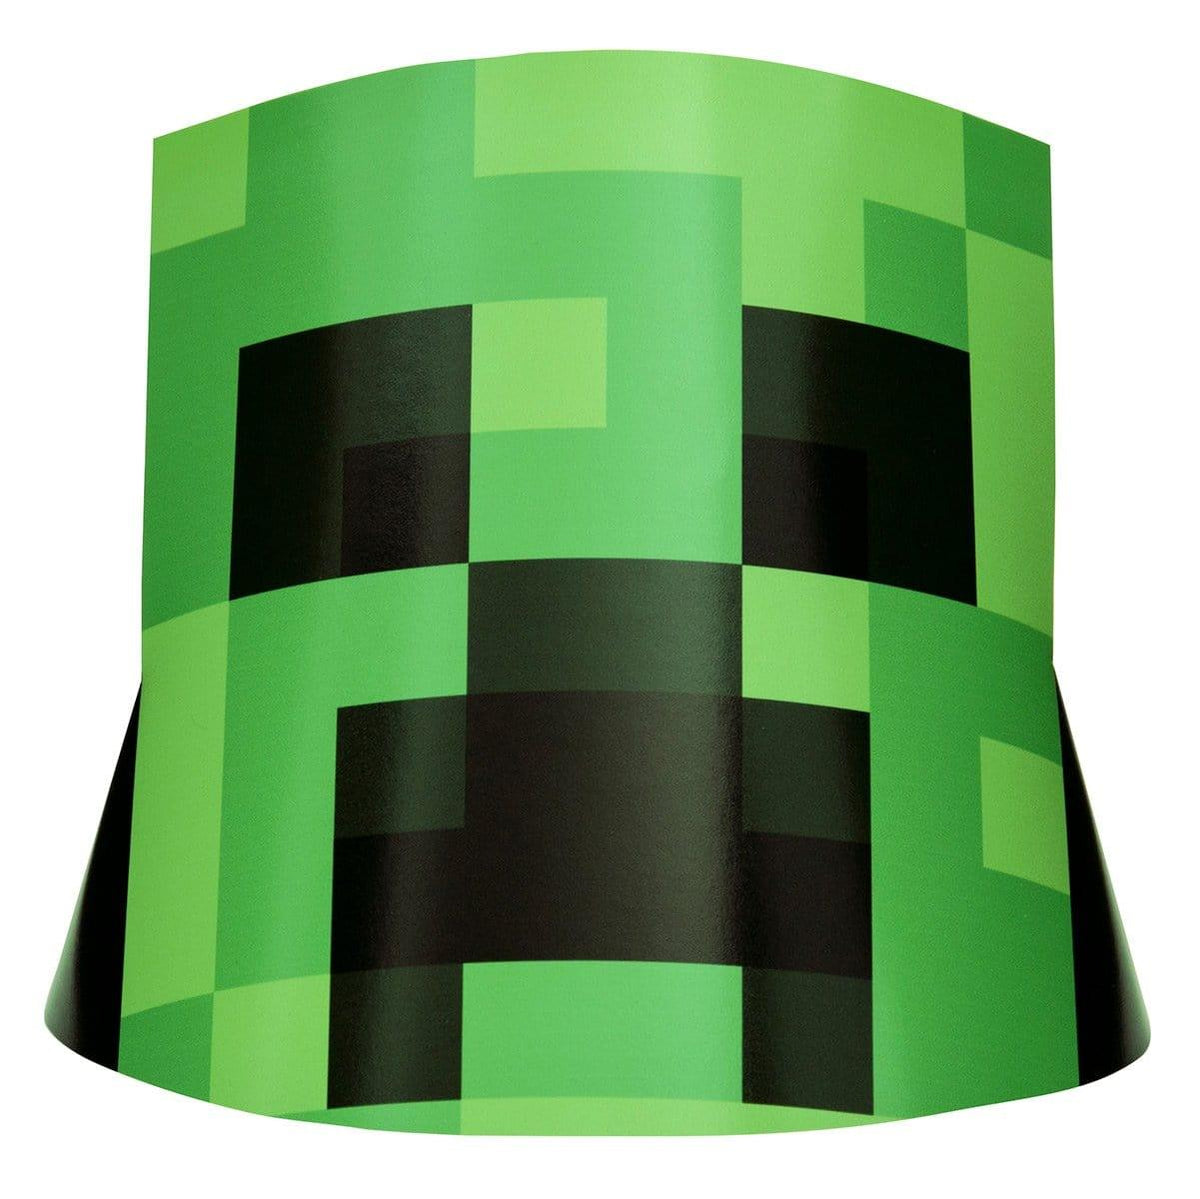 Buy Kids Birthday Minecraft party hats, 8 per package sold at Party Expert